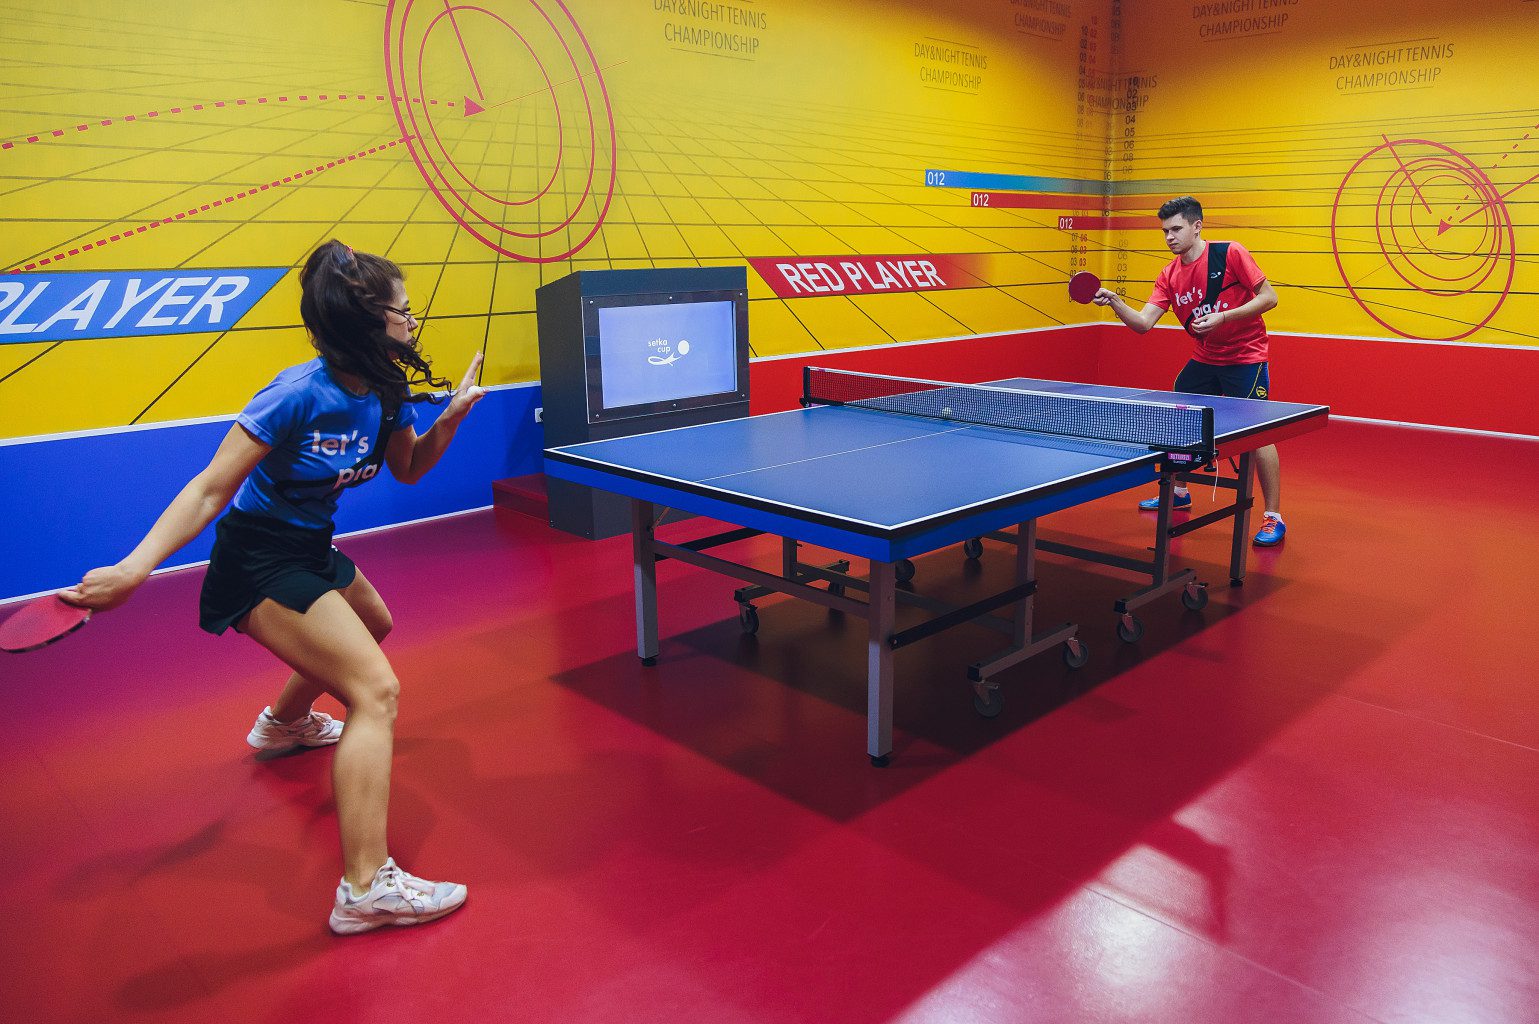 THE LARGEST PLATFORM FOR TABLE TENNIS DEVELOPMENT IN UKRAINE THE SETKA CUP OPENS ITS FIRST LOCATION IN THE EU